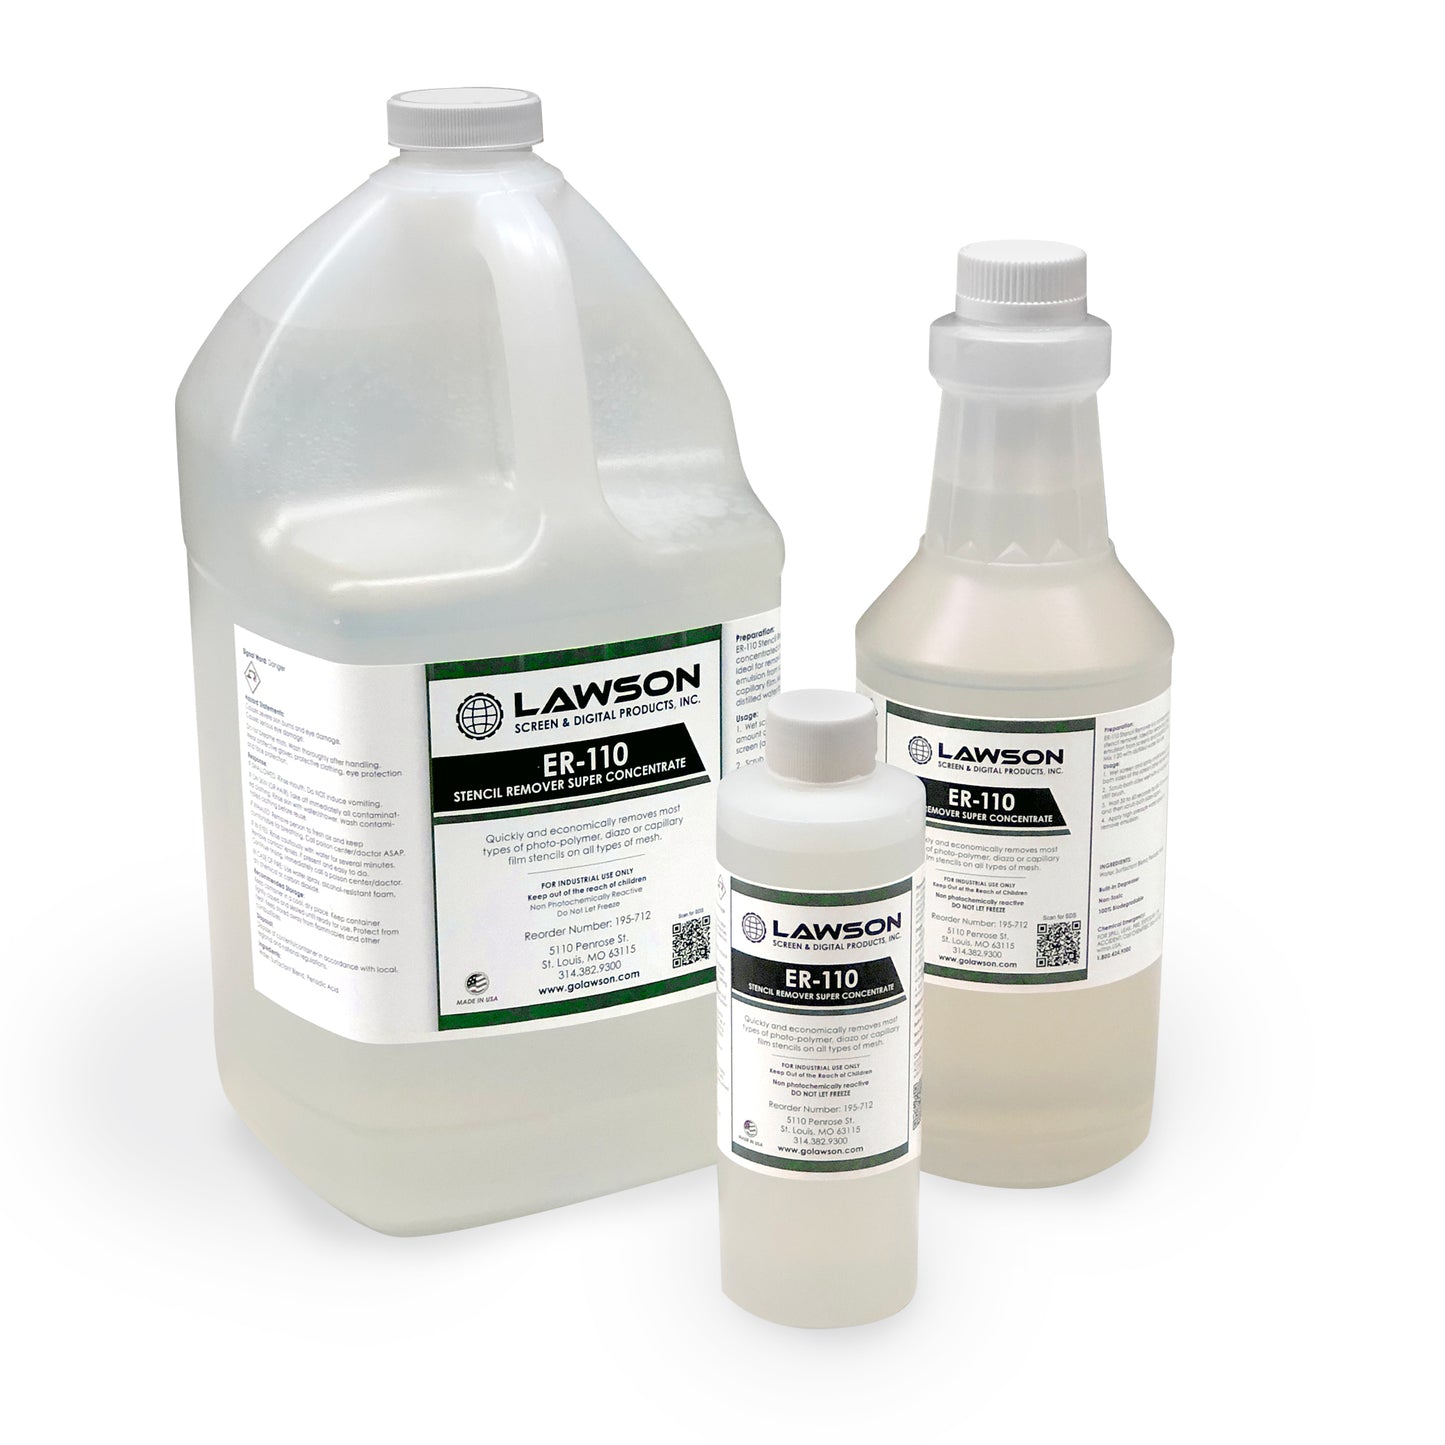 ER-110 Super Concentrate Emulsion Remover-Screen Printing Reclaiming Chemicals-Lawson Screen & Digital Products Lawson Screen & Digital Products dtf printer screen printing direct to fabric equipment machine printers equipment dtg printer screen printing direct to garment equipment machine printers